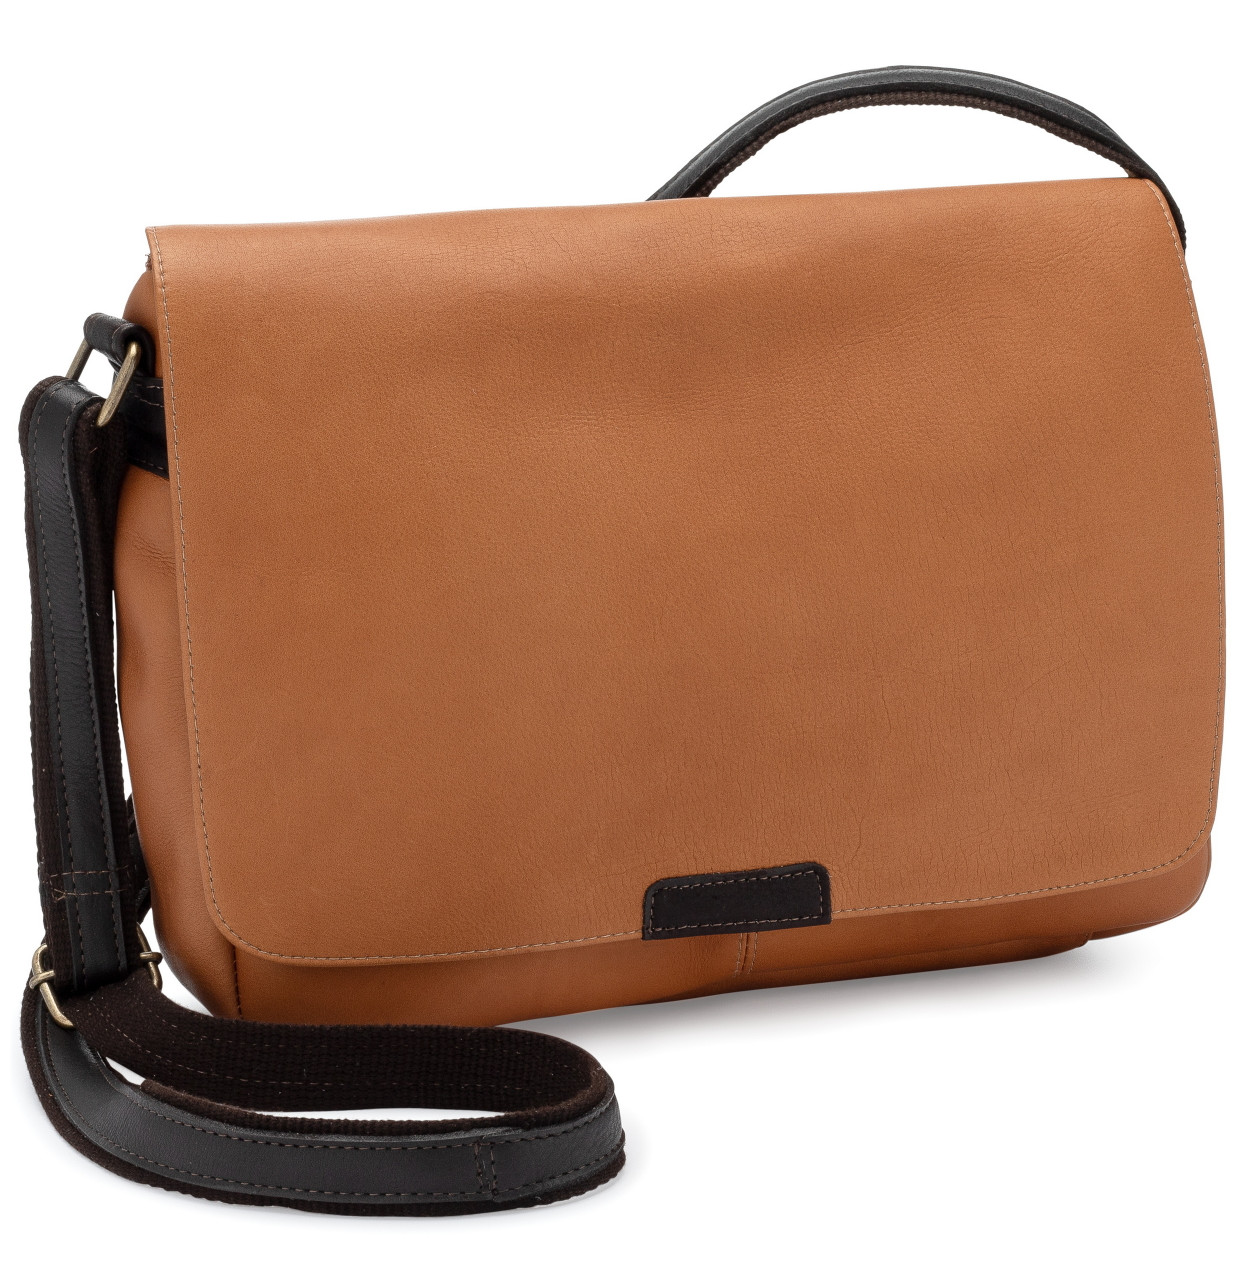 Le Donne Leather - Runaway Crossbody (Navy)